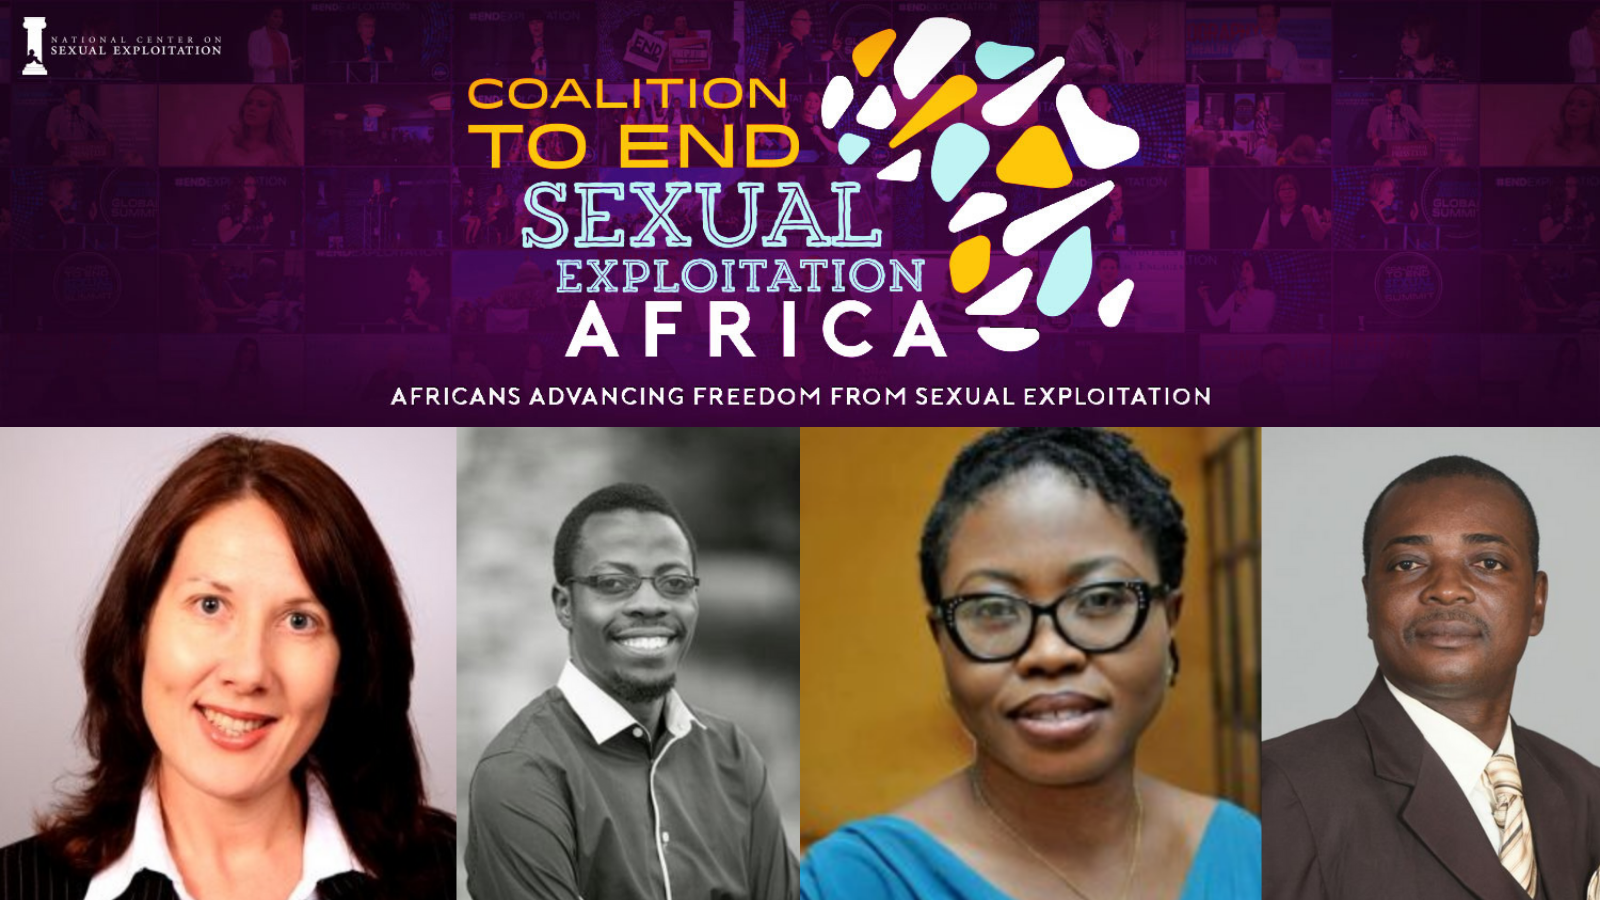 The First Multi-National Online Event to Address the Harms of Pornography in Africa